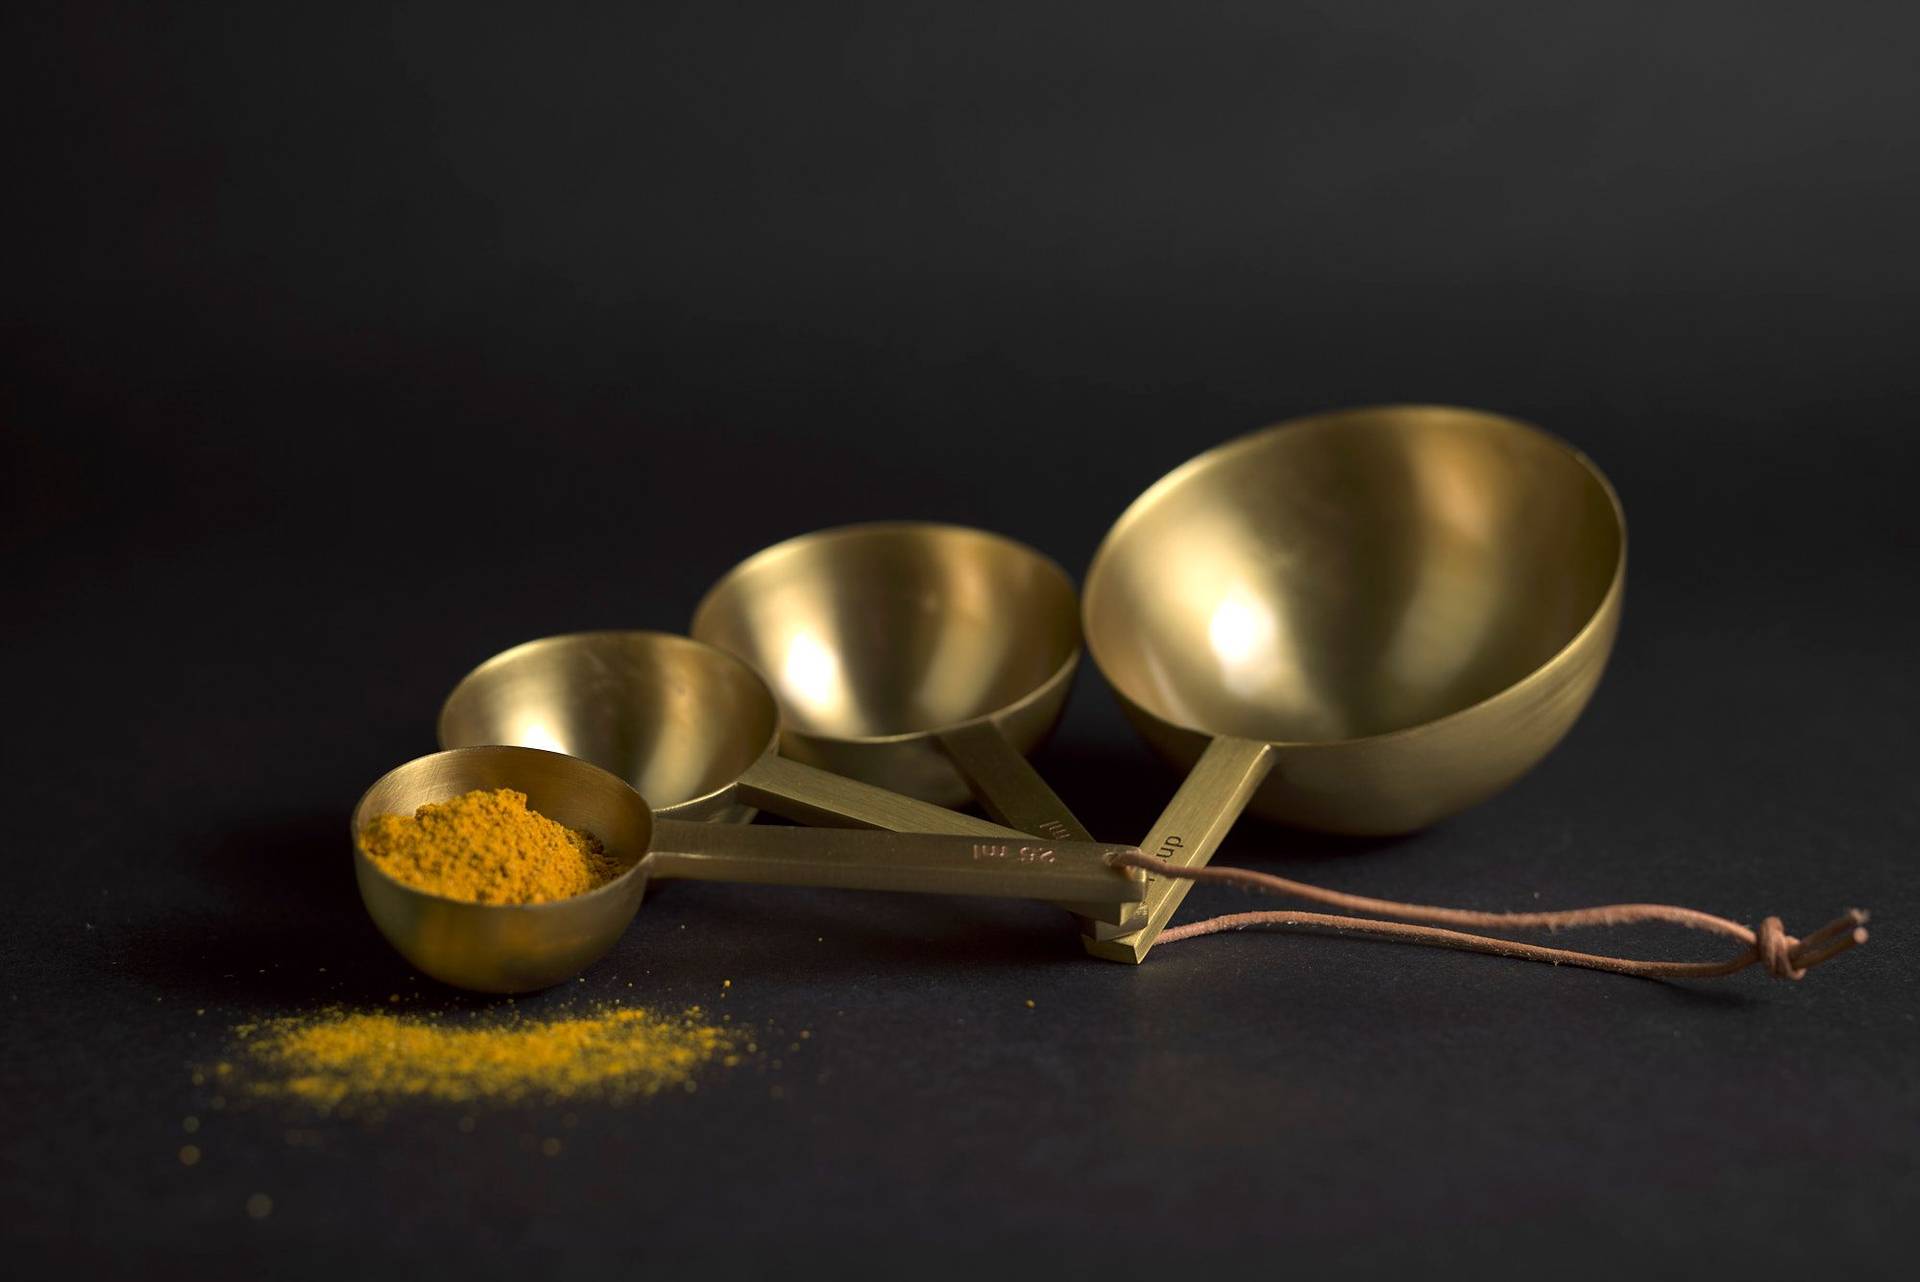 madras curry powder in brass measuring spoons with black background